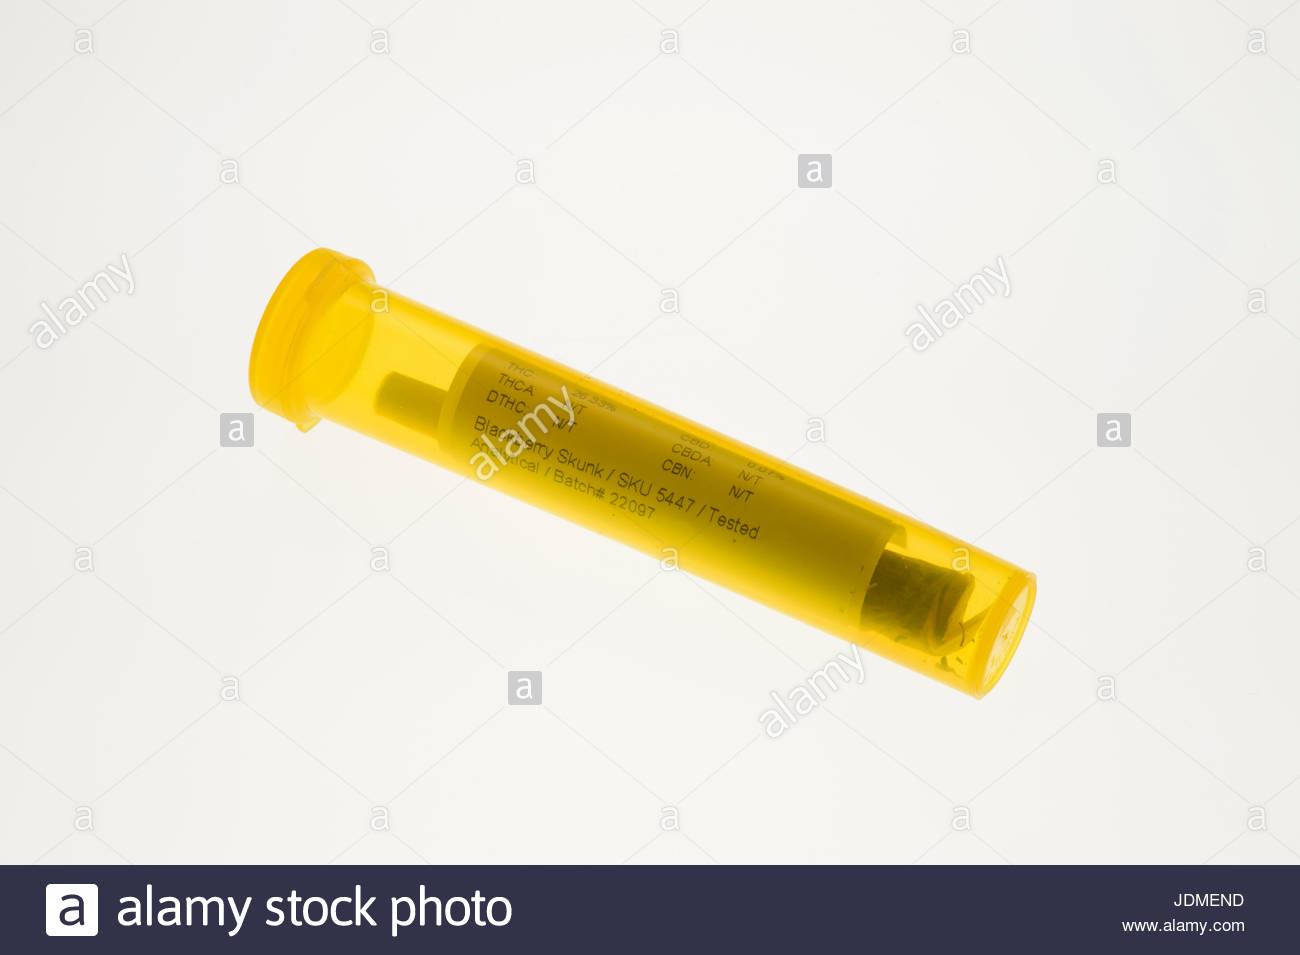 Download A Medical Marijuana Joint In A Yellow Plastic Tube With Thc And Cbd Stock Photo Alamy Yellowimages Mockups